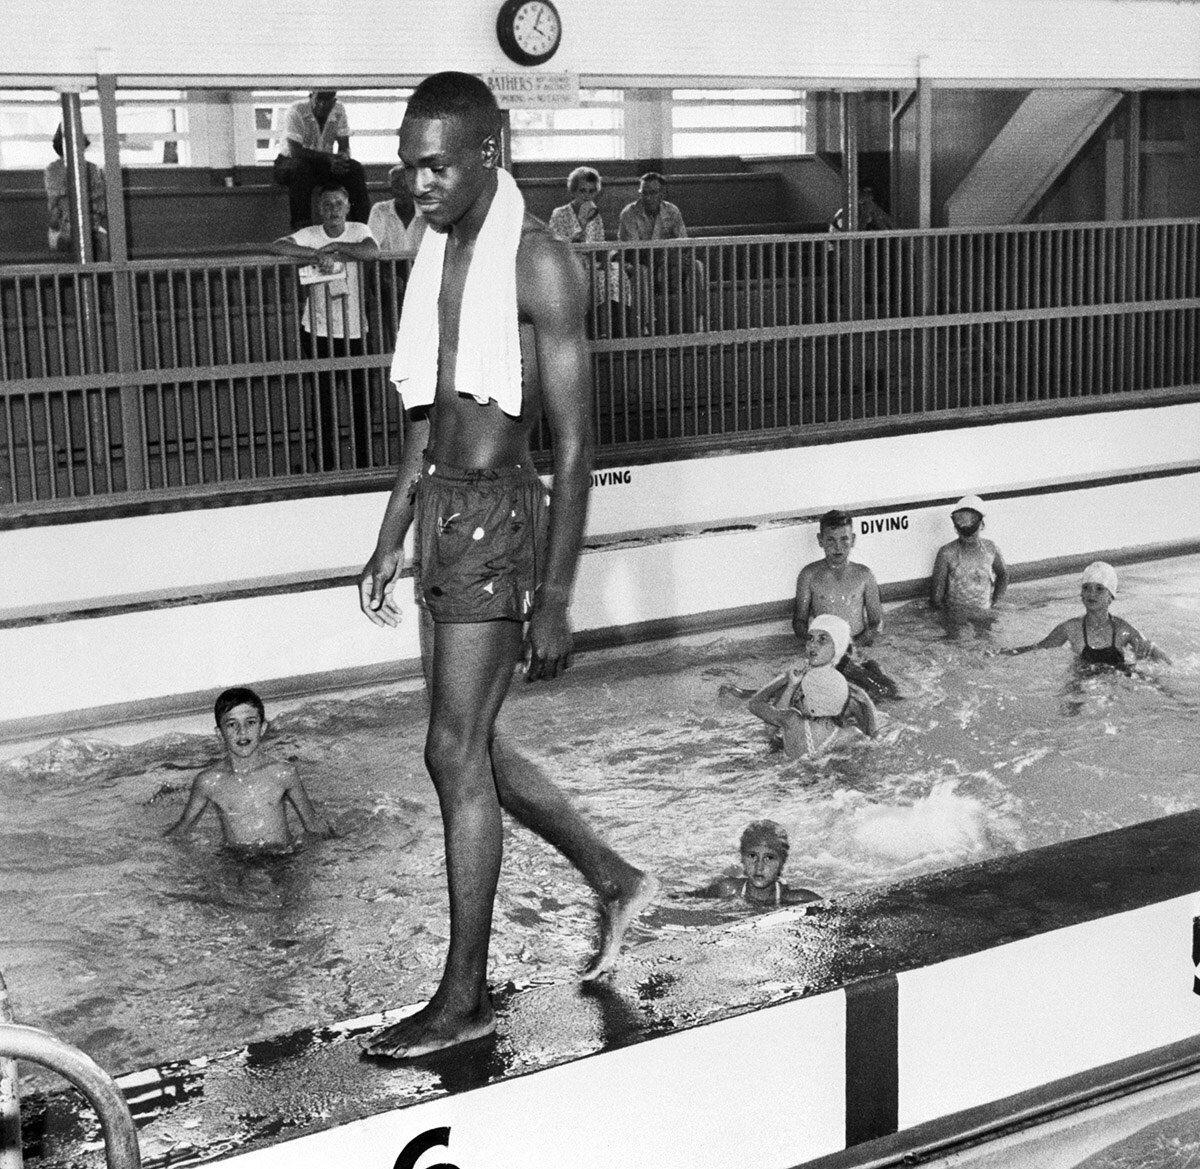 David Isom, 19 years old, bravely broke the color line in a segregated pool in Florida on June 8, 1958, which resulted in officials closing the facility.